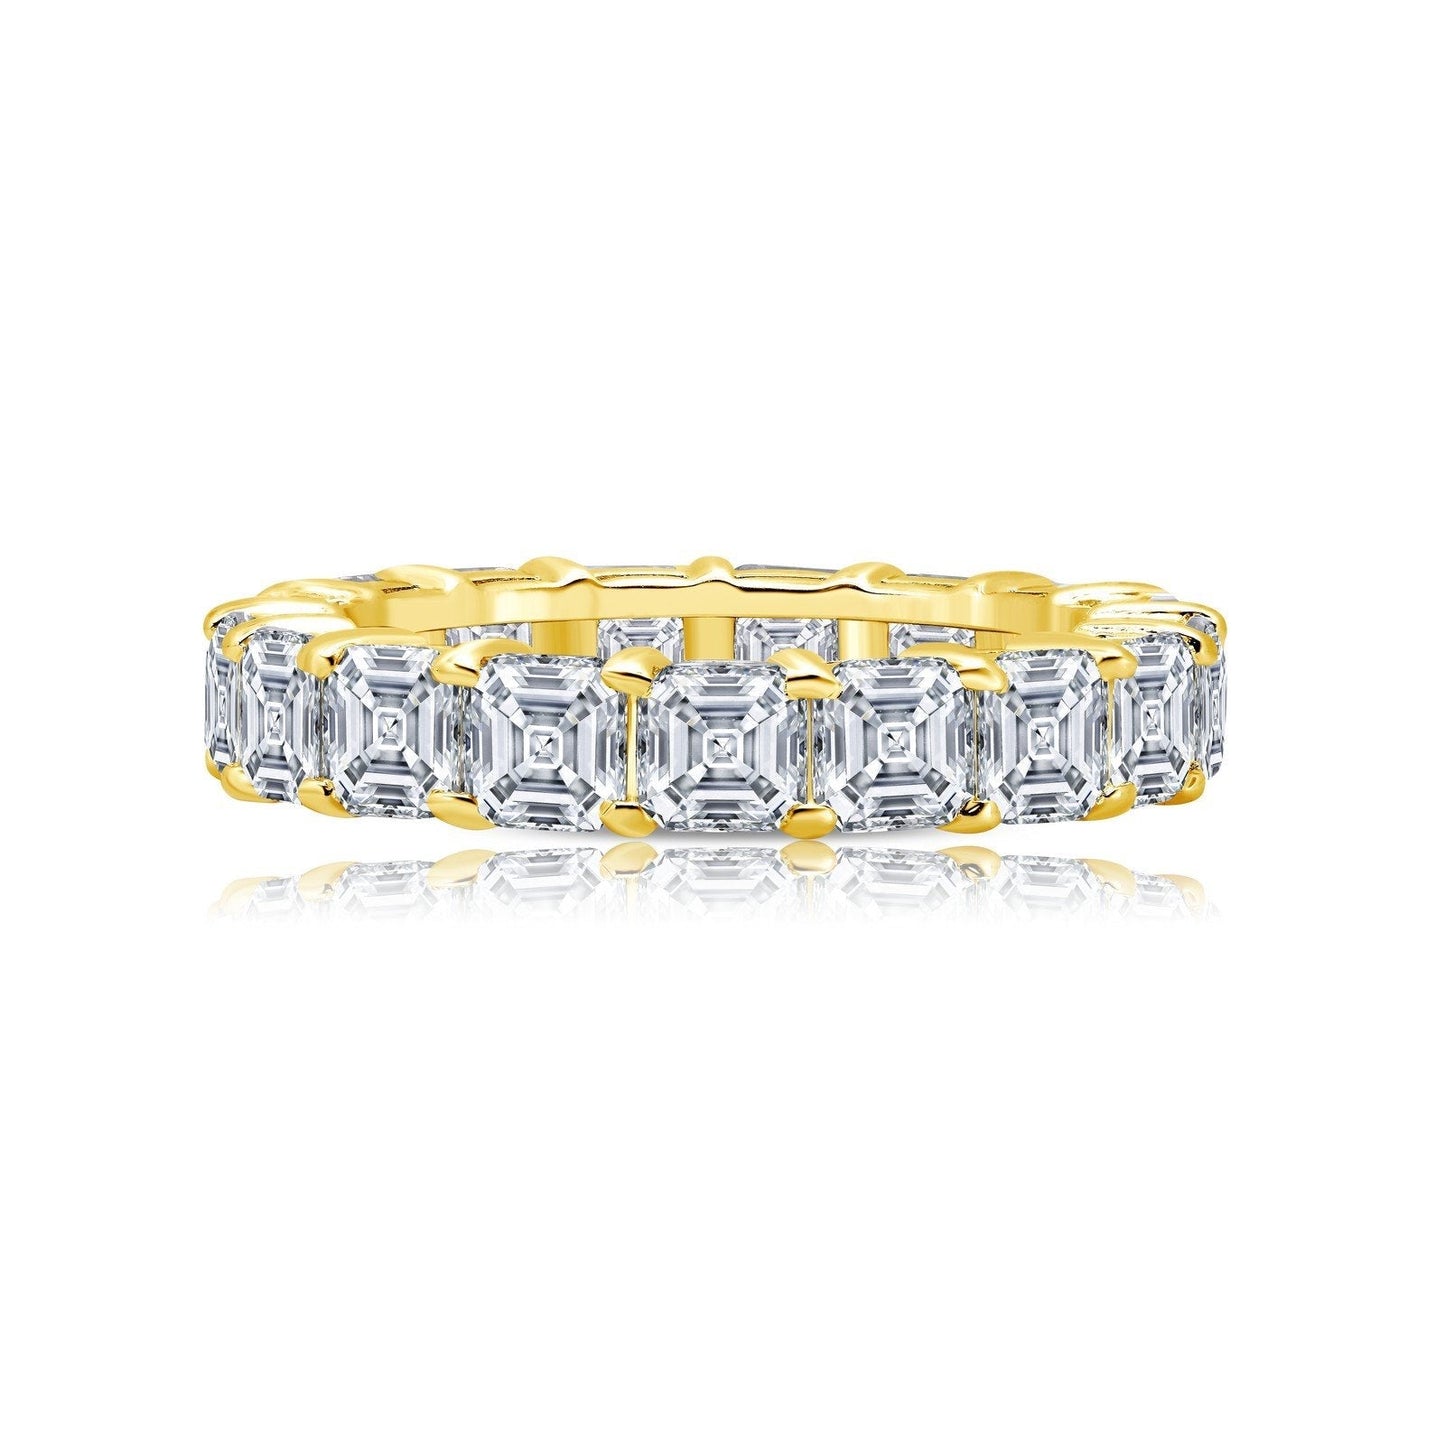 Lafonn 6.63 CTW Anniversary Eternity Band Simulated Diamond RINGS Size 9 Gold 6.63 CTS Approx. 4mm (W)